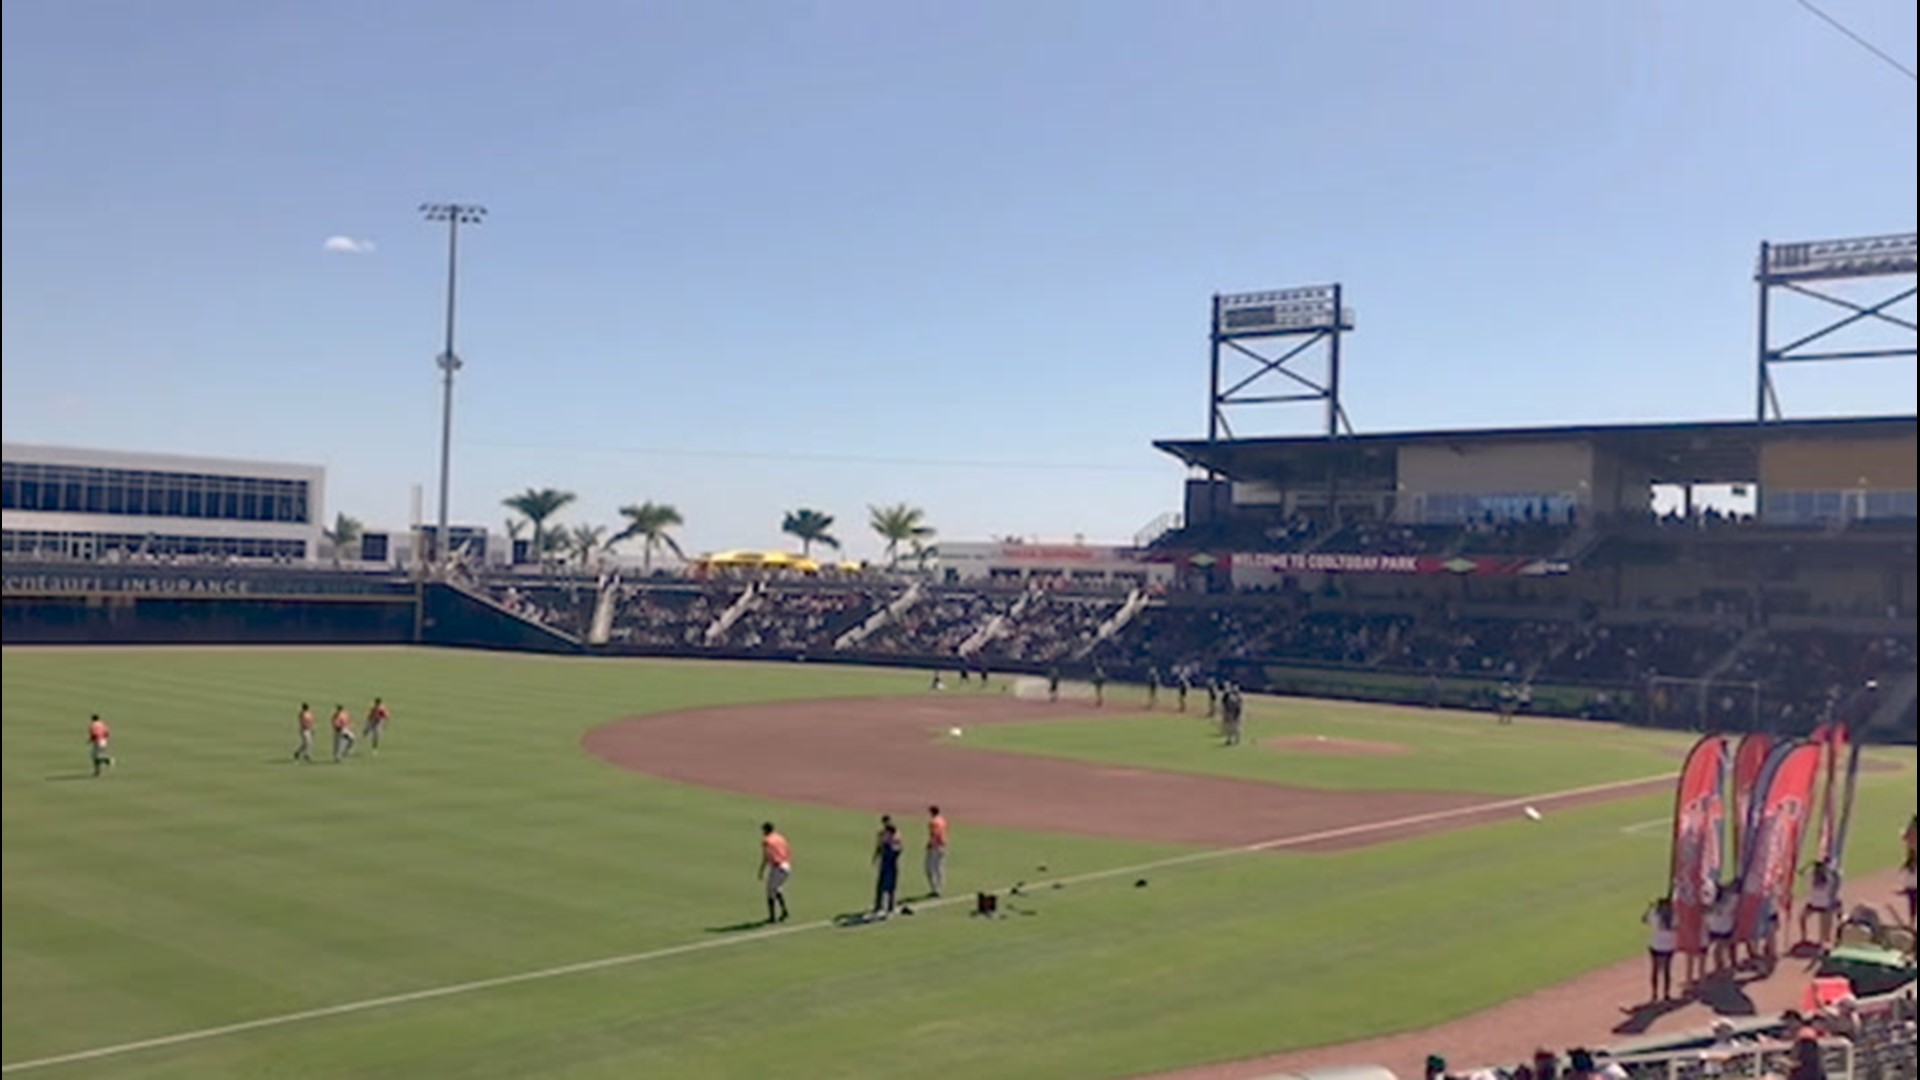 Feb. 22 was a beautiful day to open up the Grapefruit League Spring Training in North Port, Florida, at the Atlanta Braves' brand new facility 'CoolToday Park.'